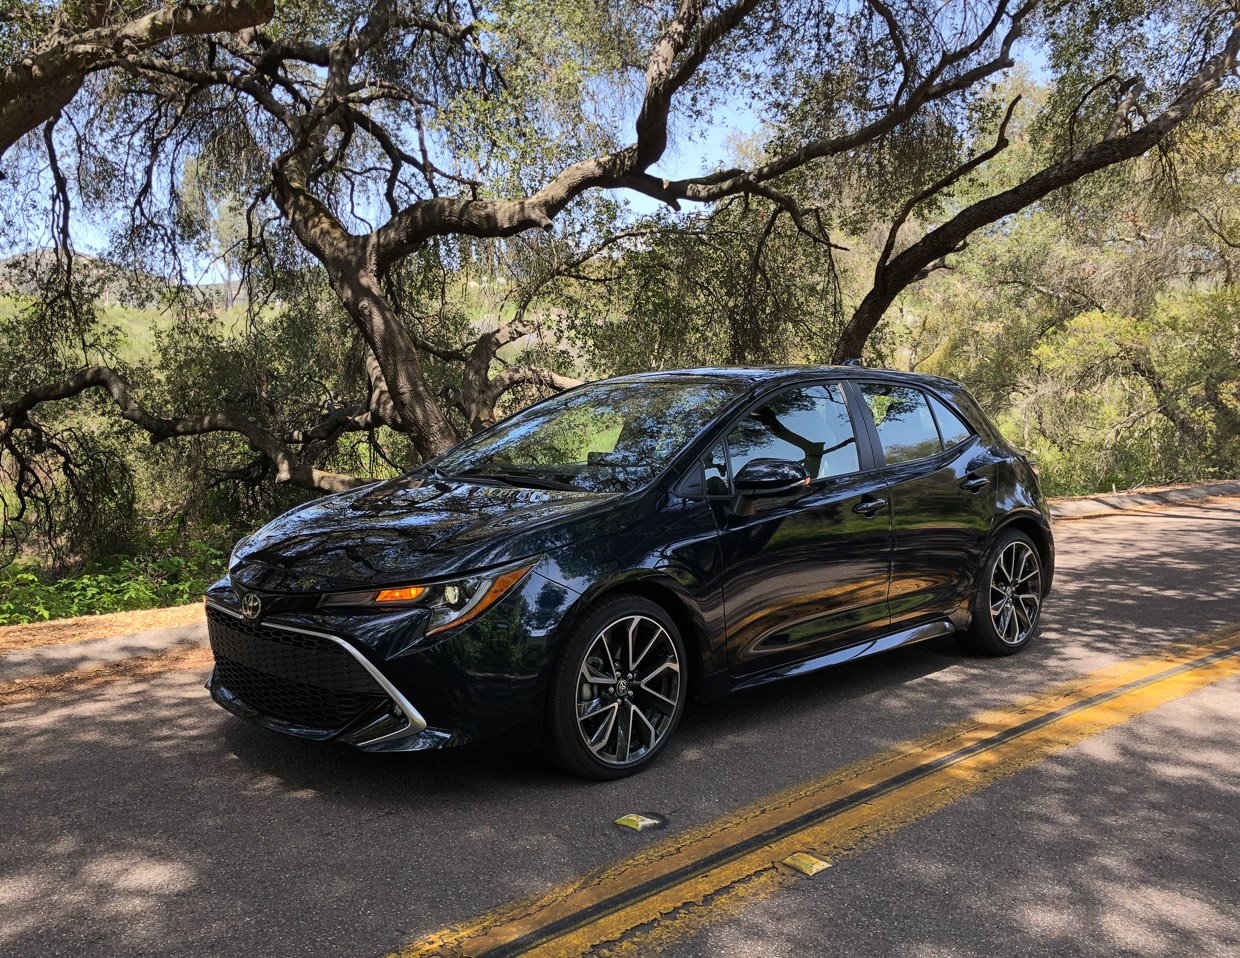 2019 Toyota Corolla Hatchback First Drive Review: Hot or Not Hatch?